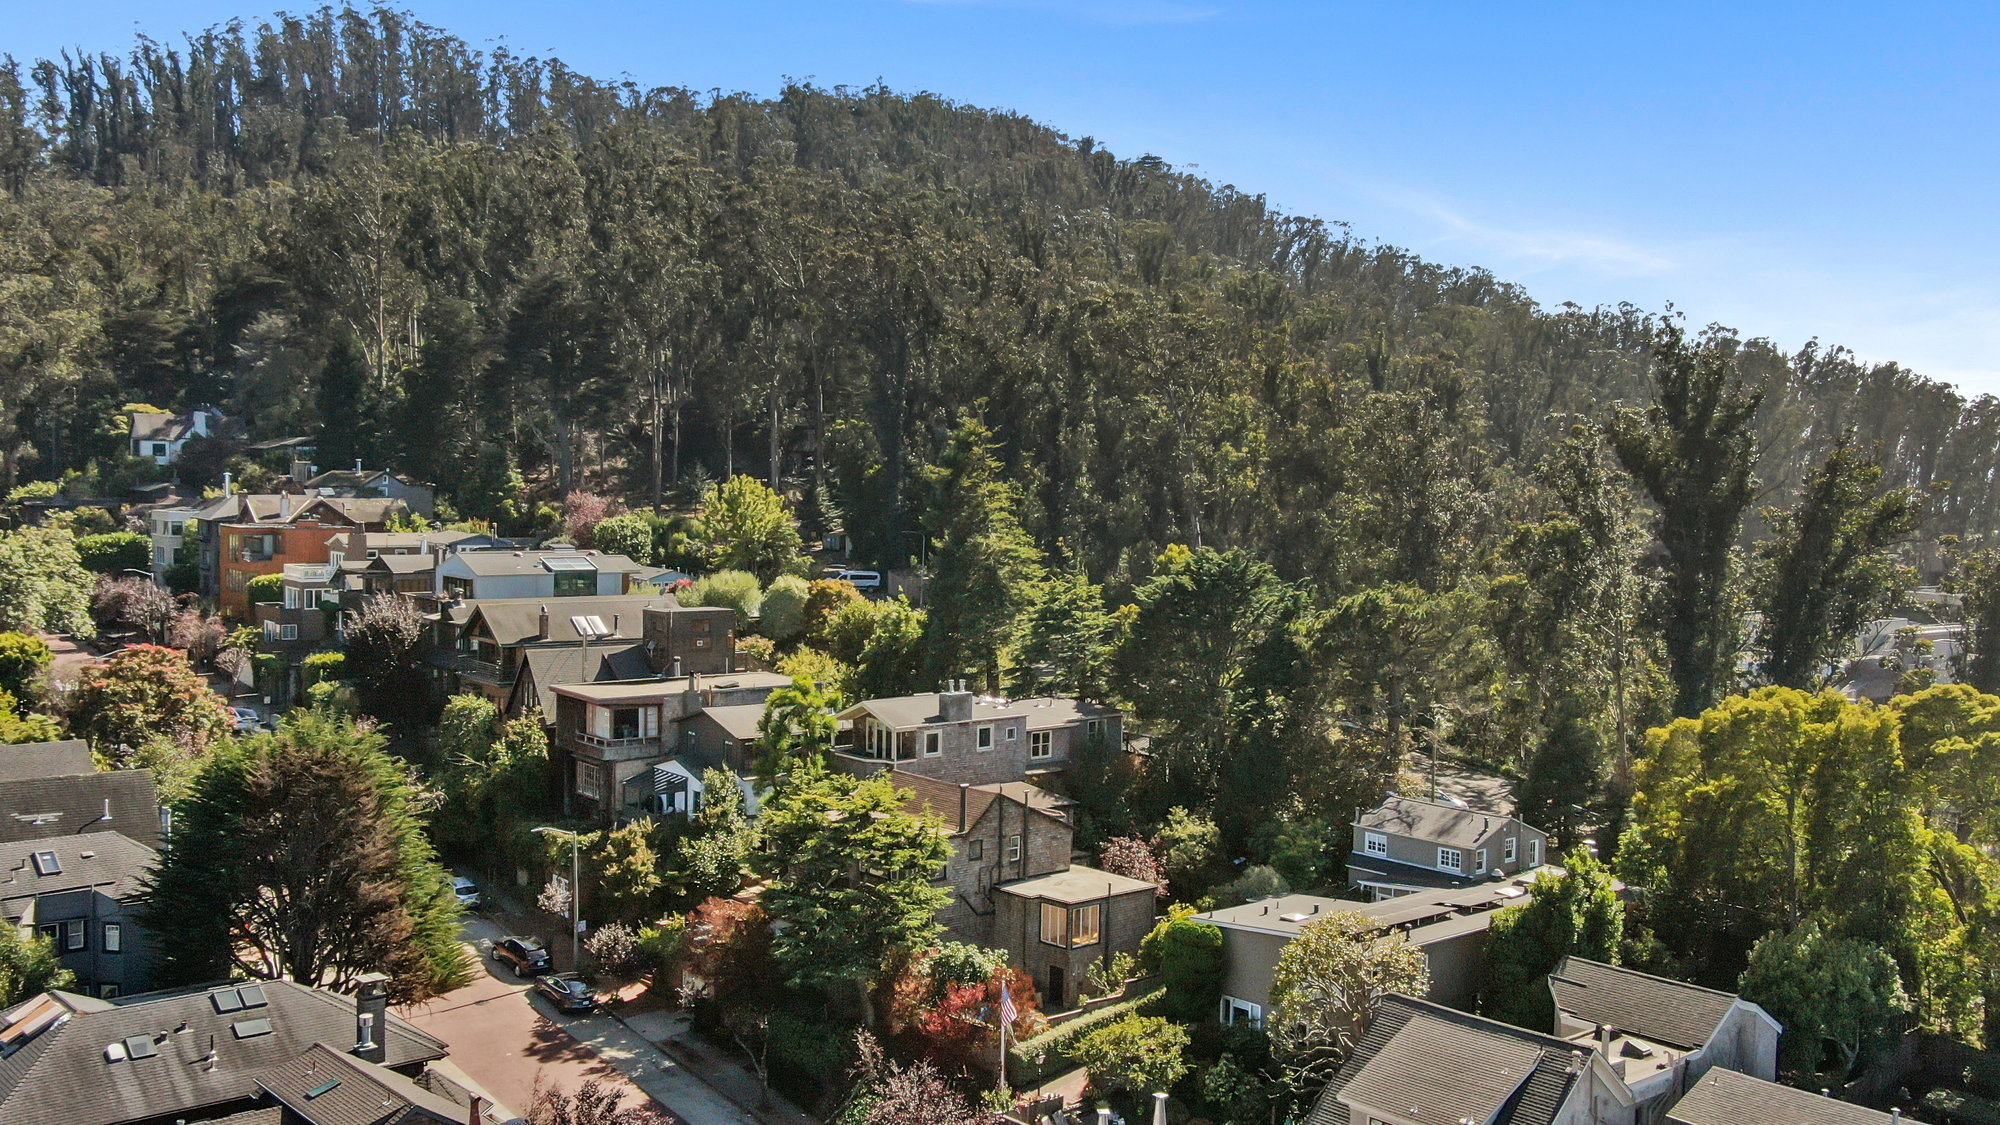 Property Photo: Aerial view of 183 Edgewood Avenue, showing the homes high elevation near Mount Sutro